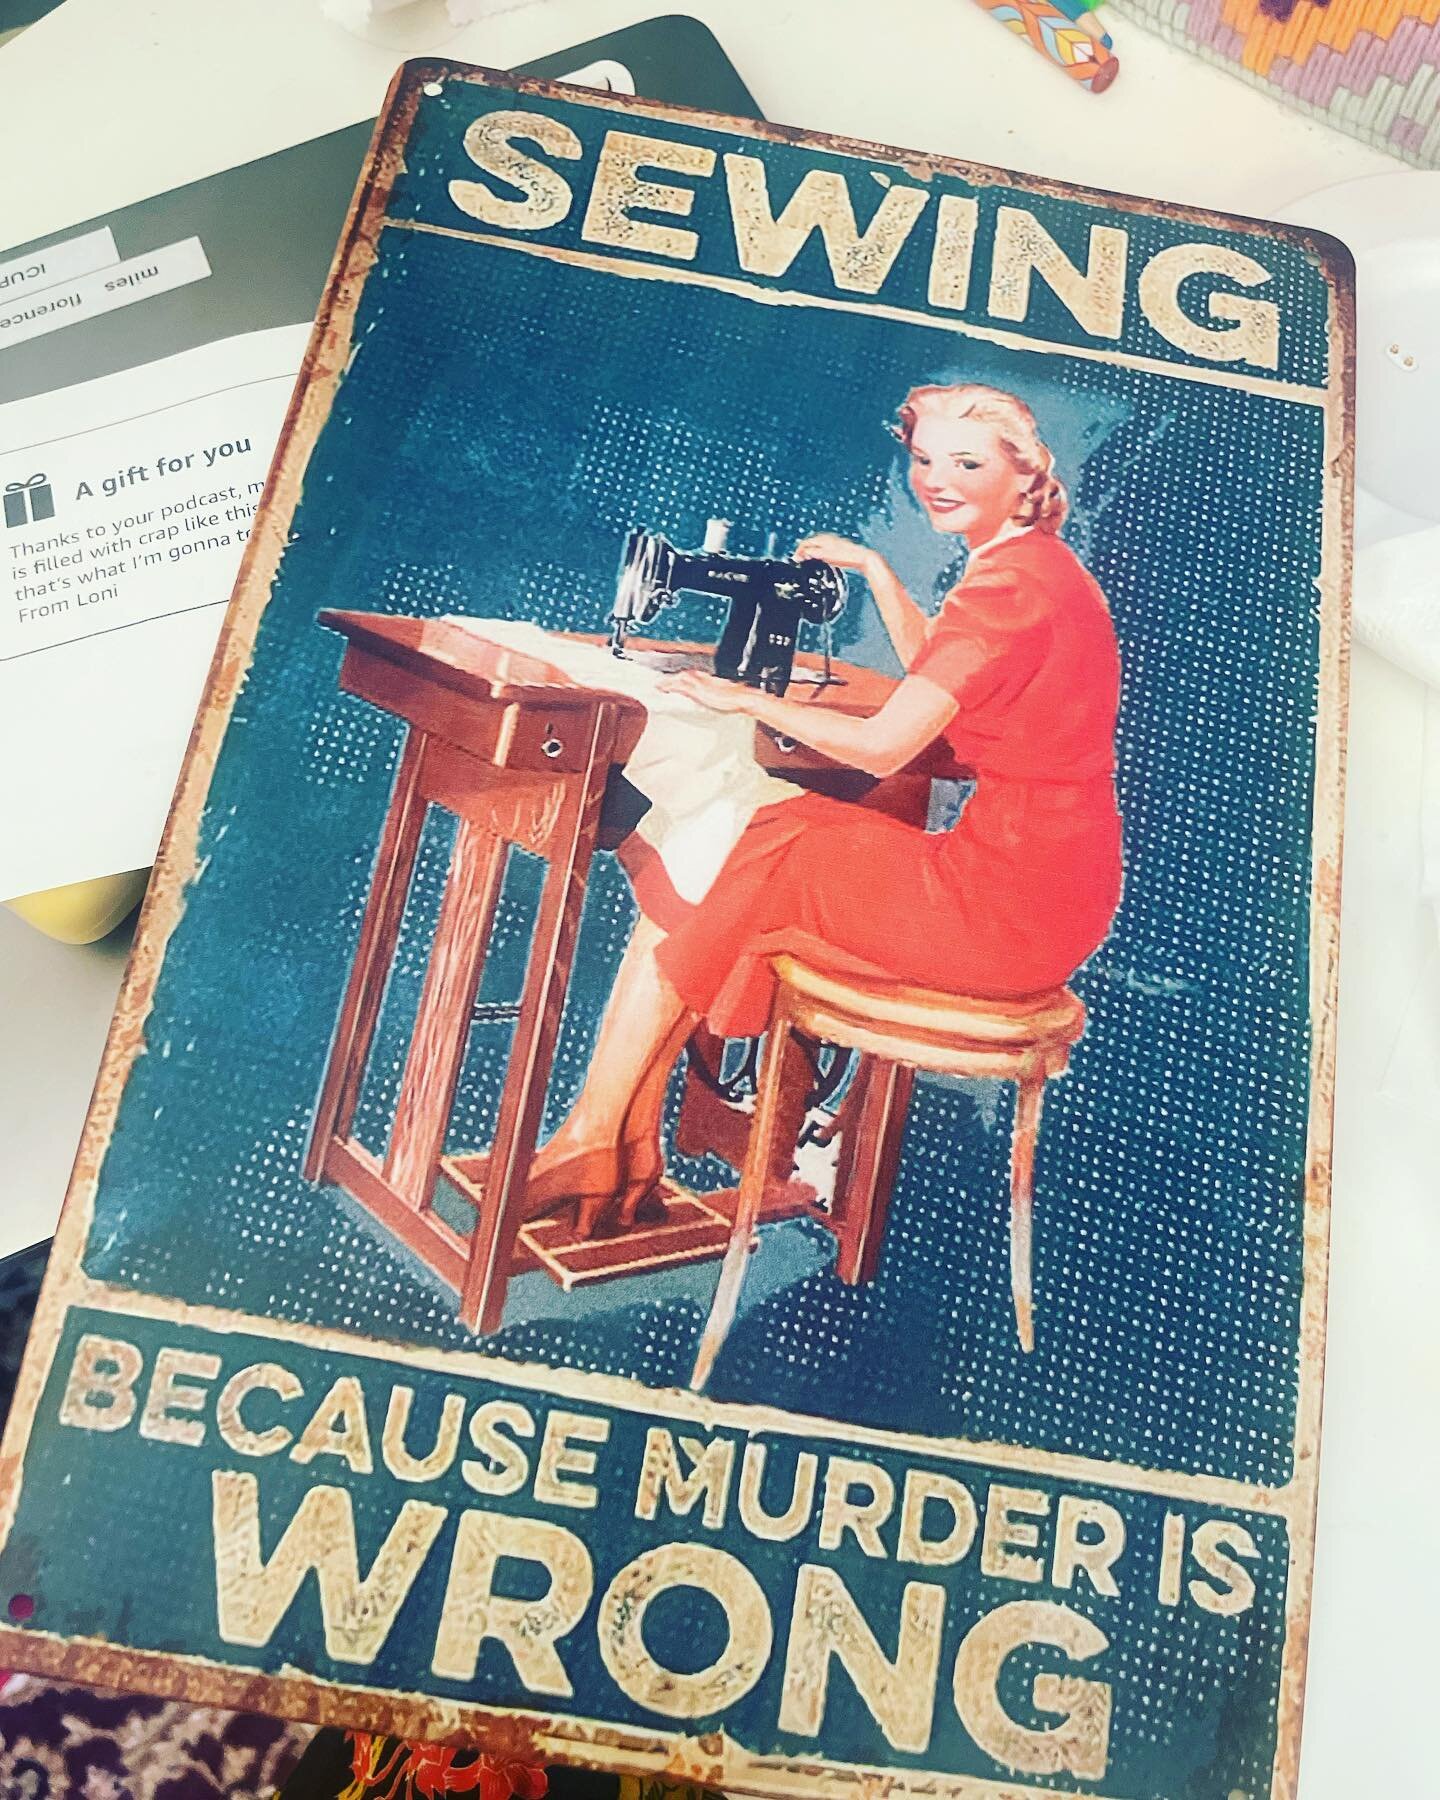 A birthday gift for @taylorpineiro from another satisfied listener! 

#murder #truecrimecommunity #ssdgm #newpodcast #historypodcast #new #sewing #craftsandcrimes